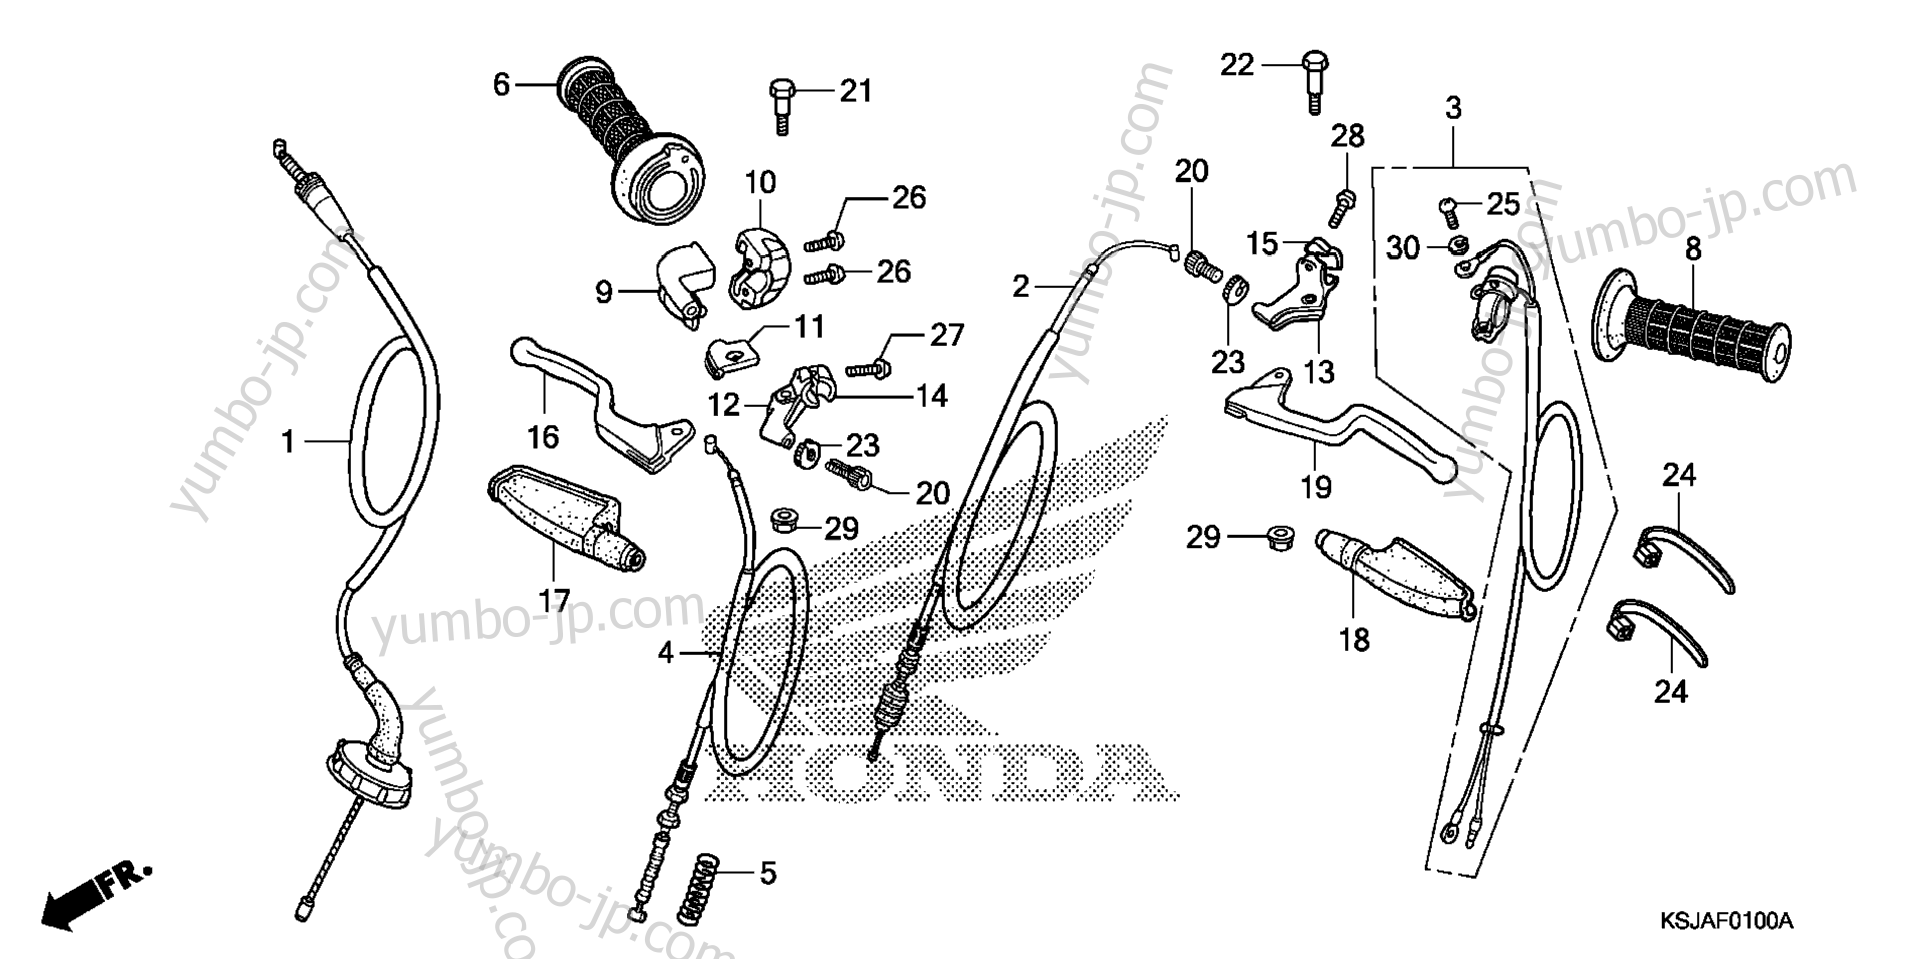 HANDLE LEVER / CABLE for motorcycles HONDA CRF80F A 2009 year